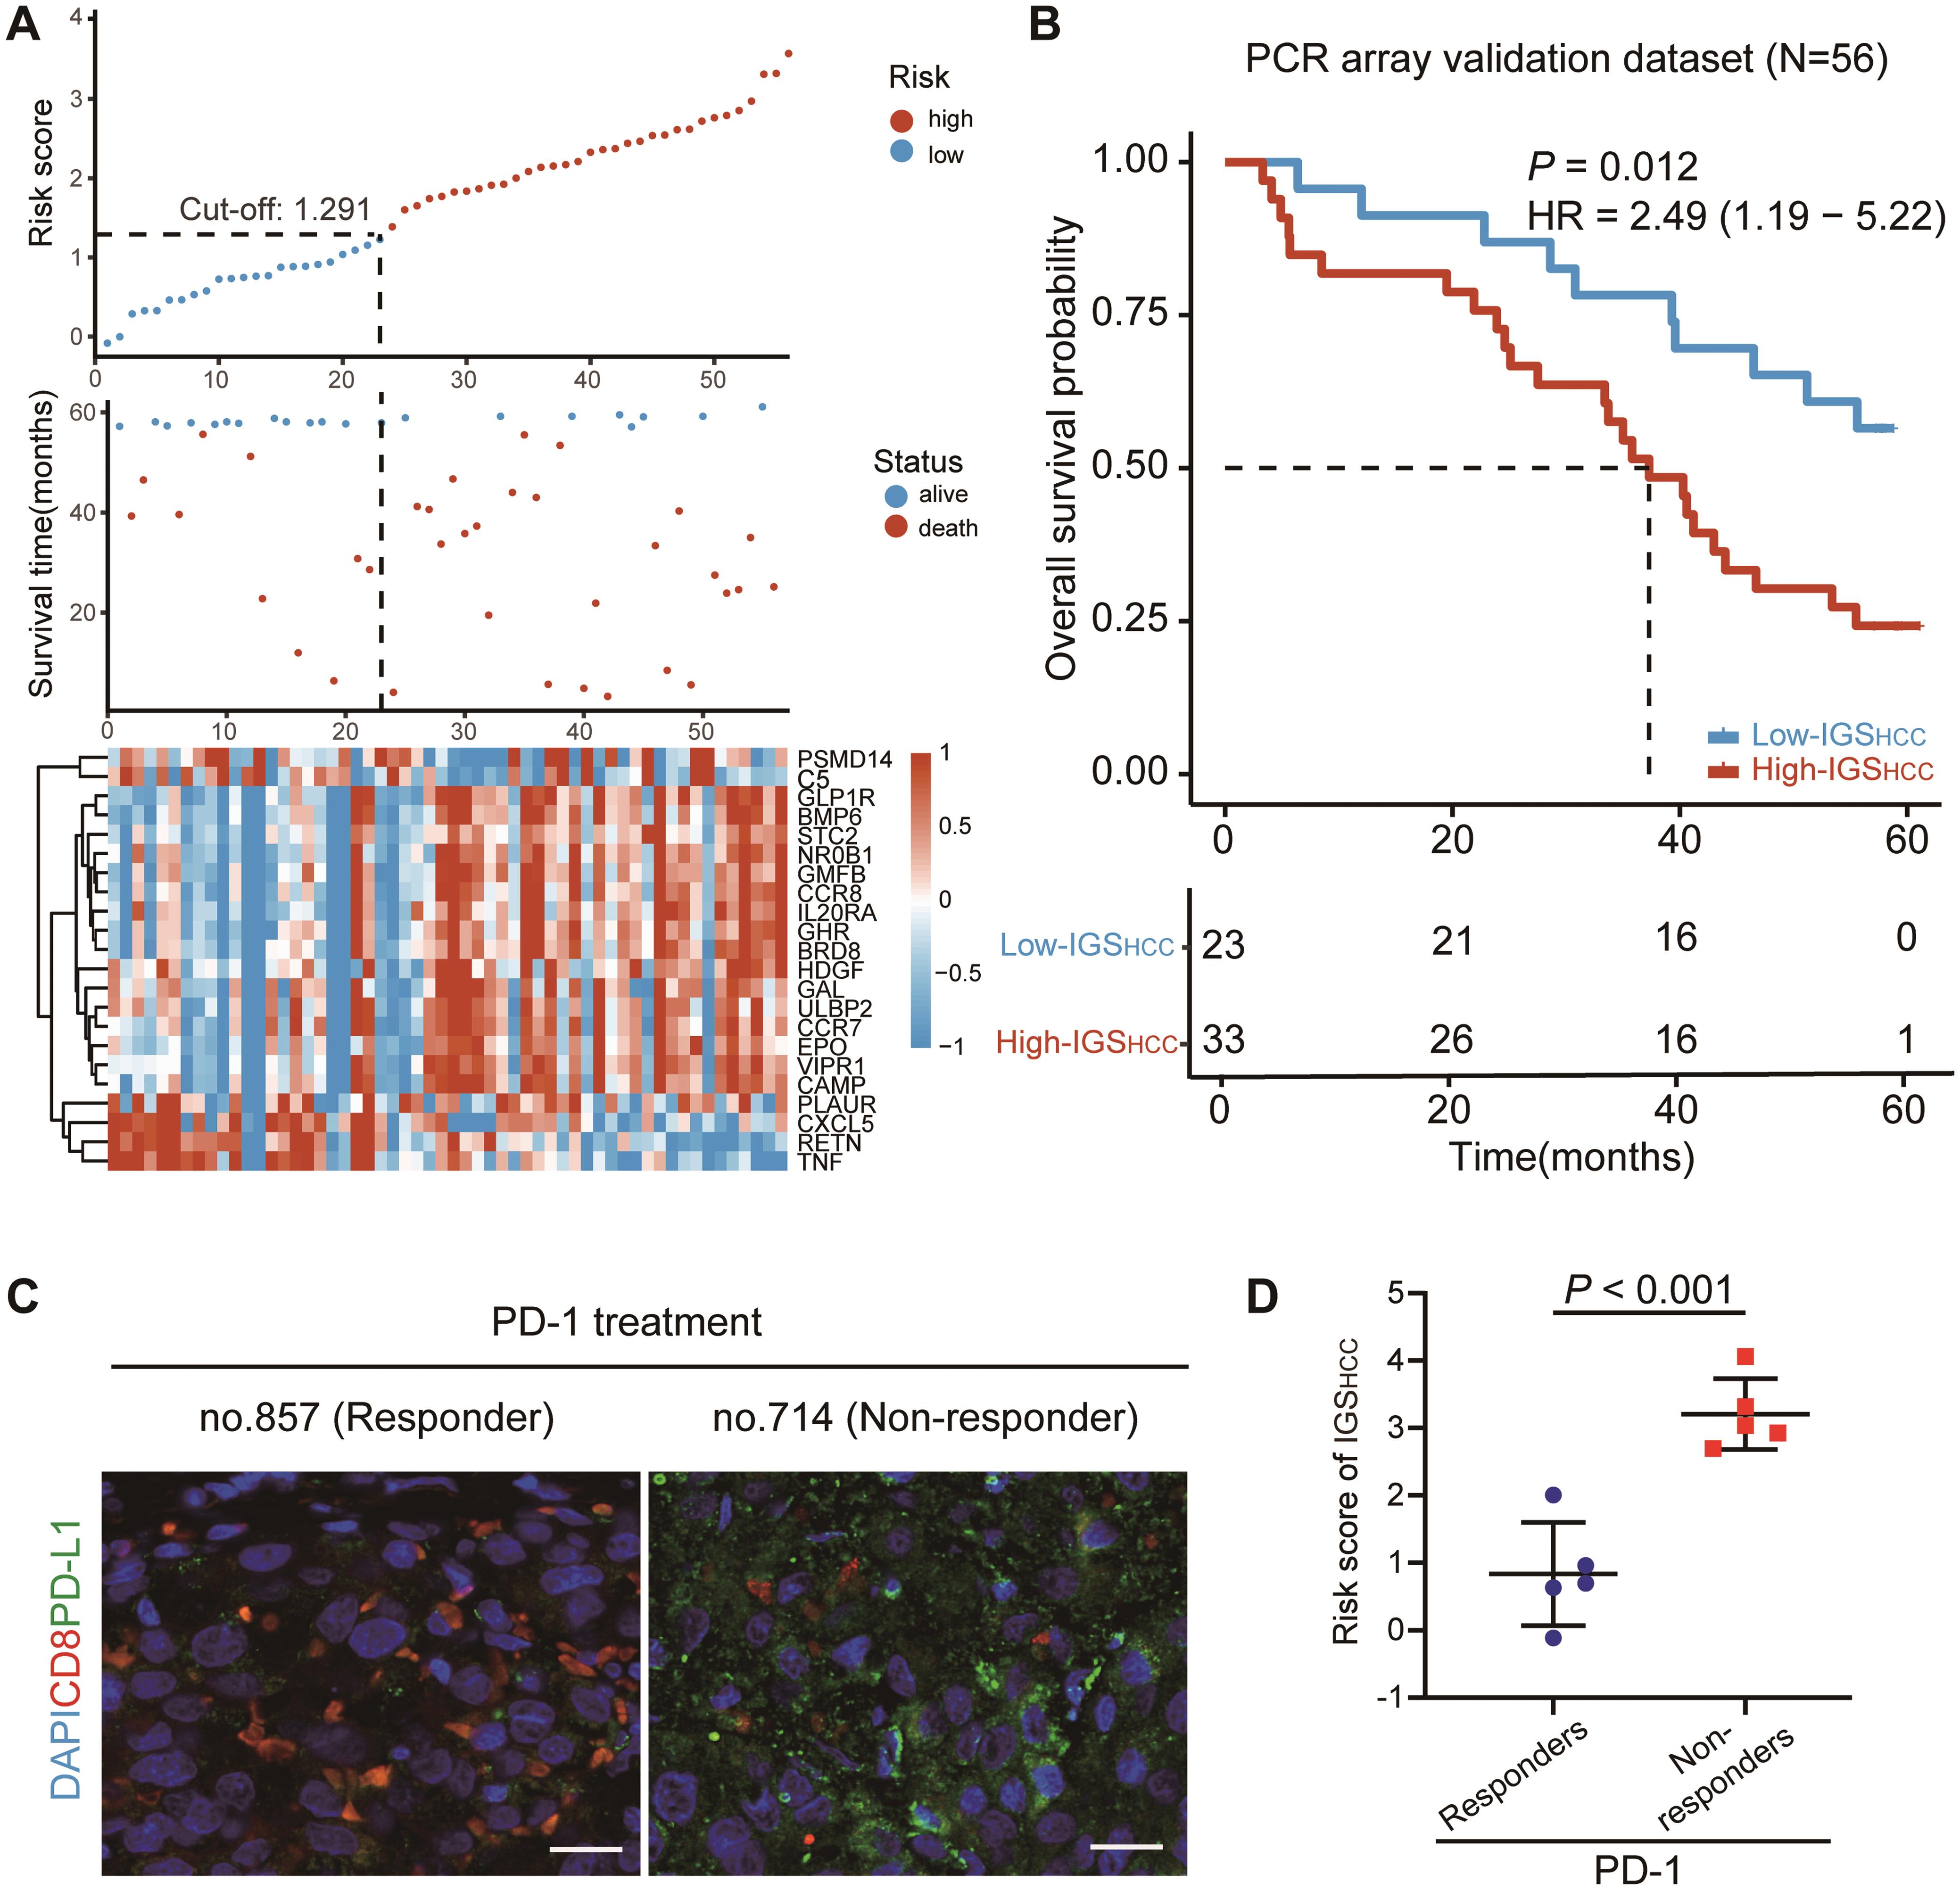 Independent clinical validation of the prognostic risk-stratification and immunotherapy response prediction ability of IGS<sub>HCC</sub>.